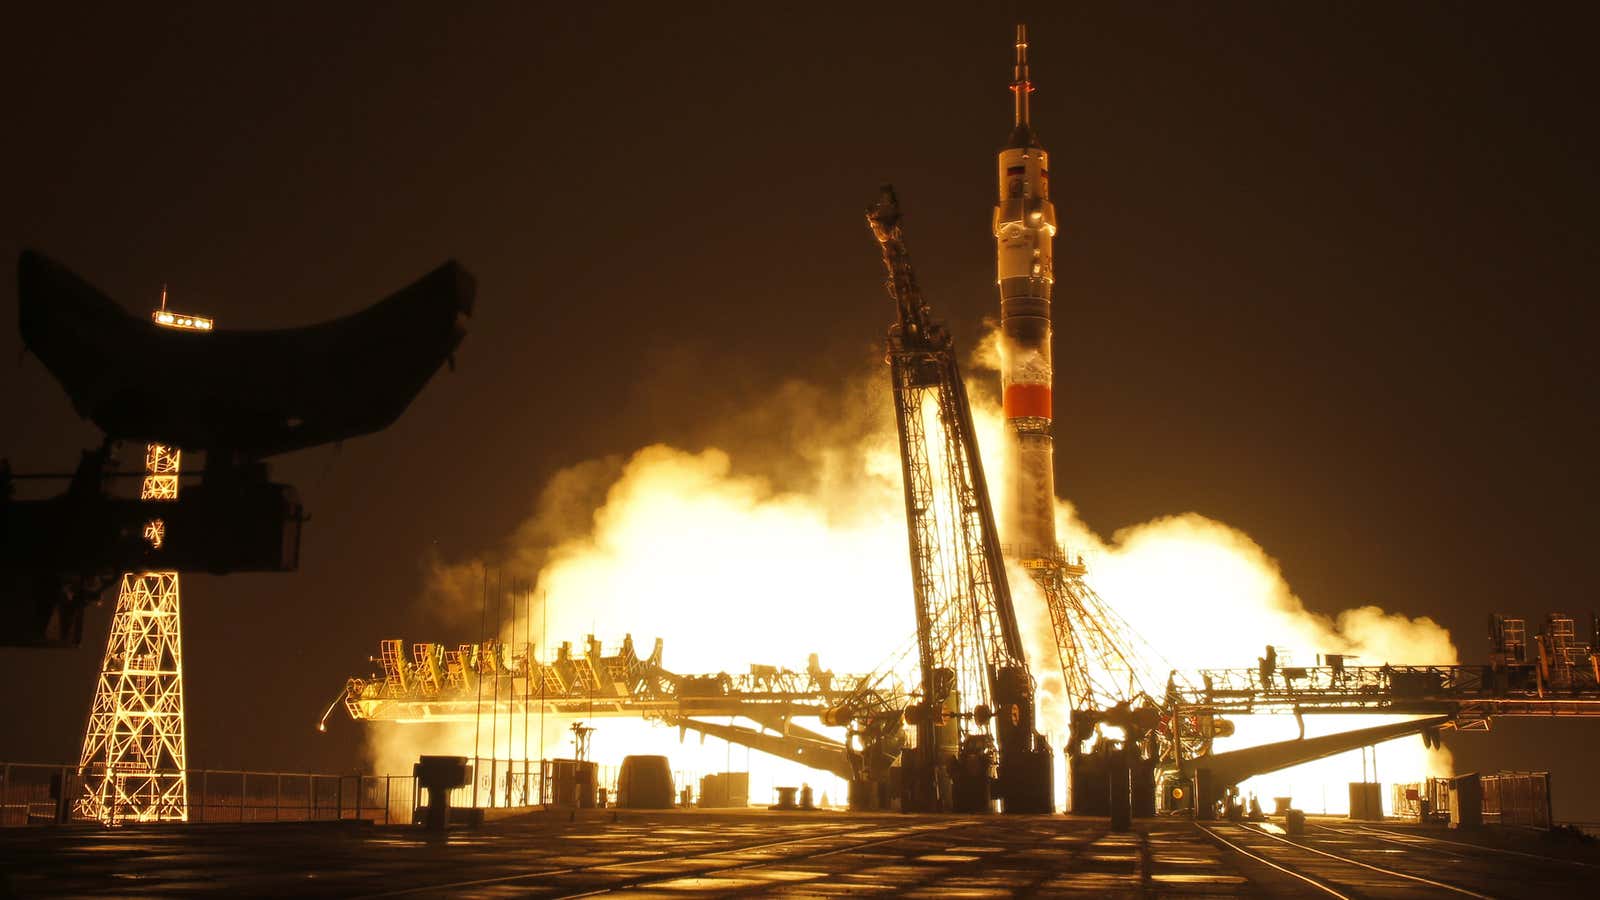 Nigeria wants to join countries like India and Russia that have successful space programs.